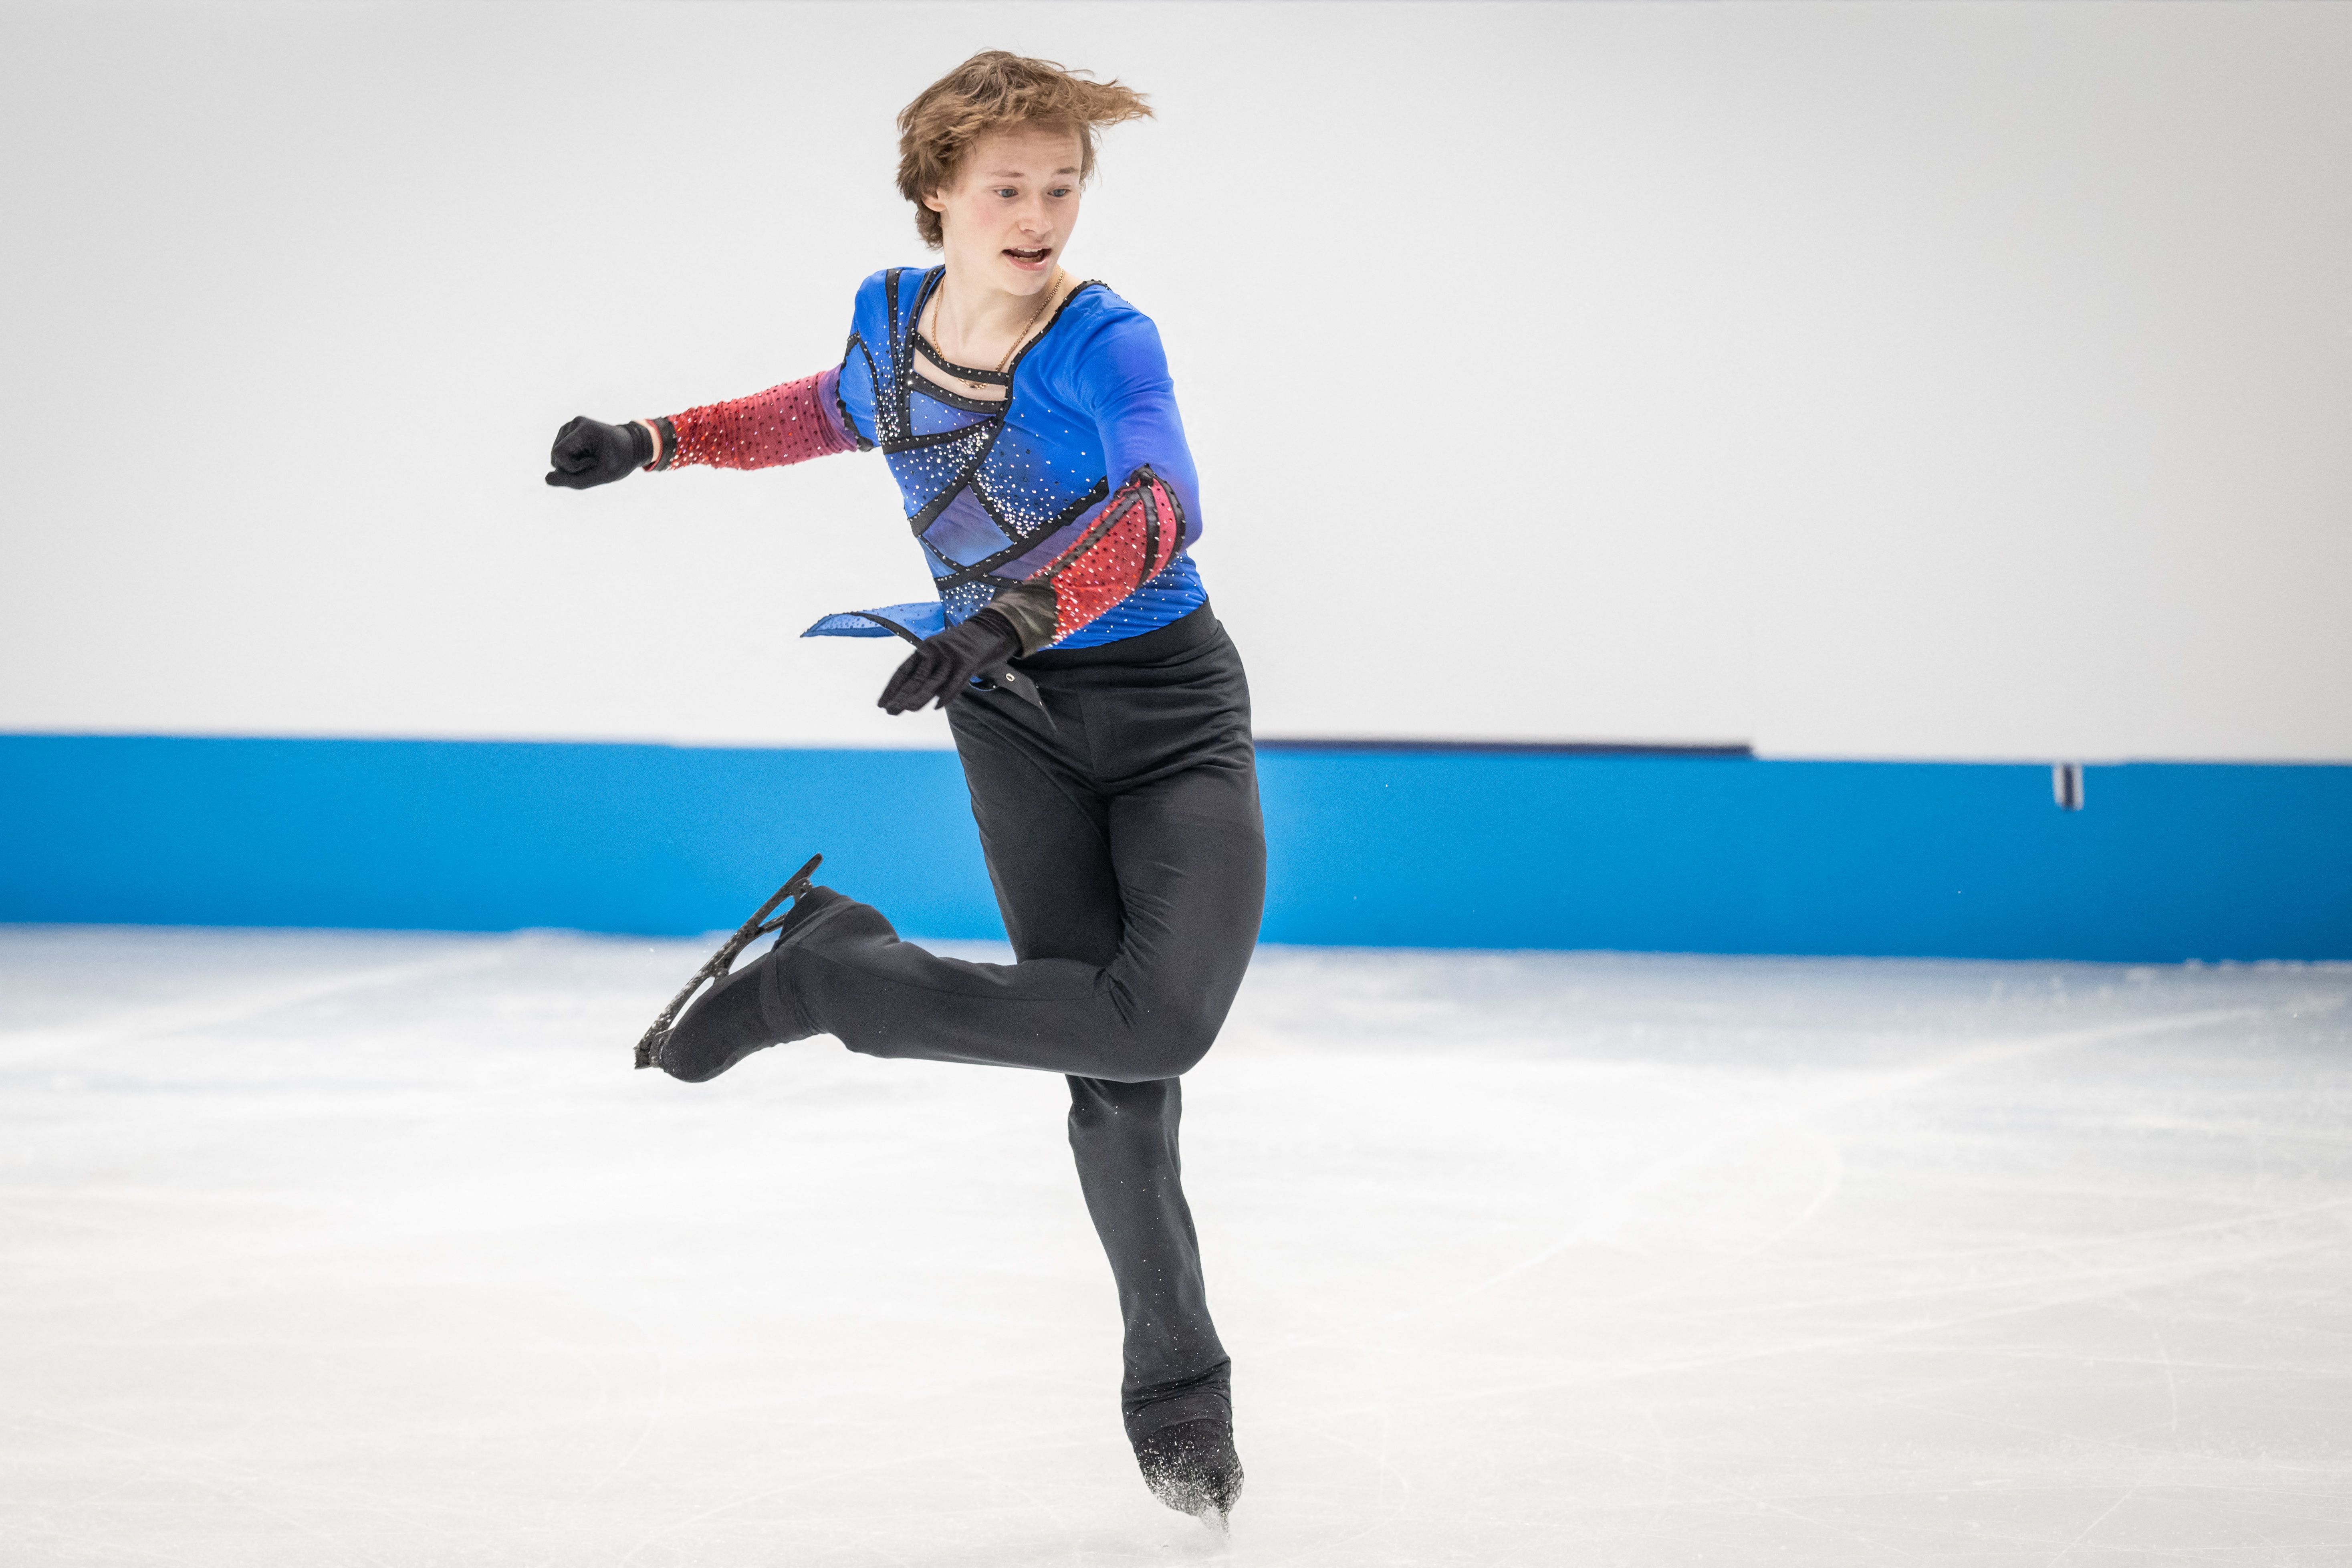 Skate America 2022 preview How to watch Ilia Malinin, Isabeau Levito, Gracie Gold